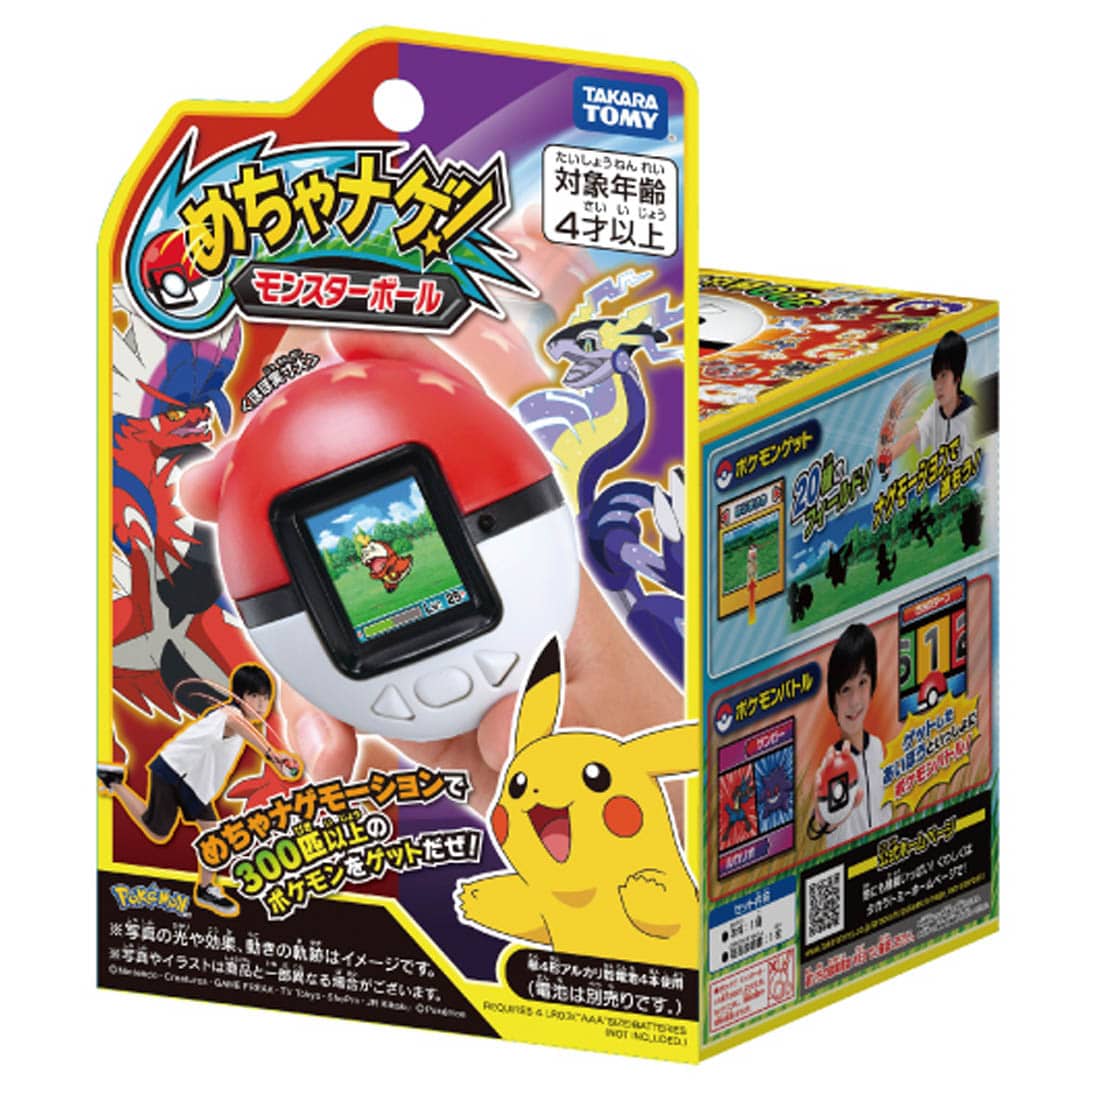 Takara Tomy Reveals New Interactive Poke Ball Toy, Now Up For Pre